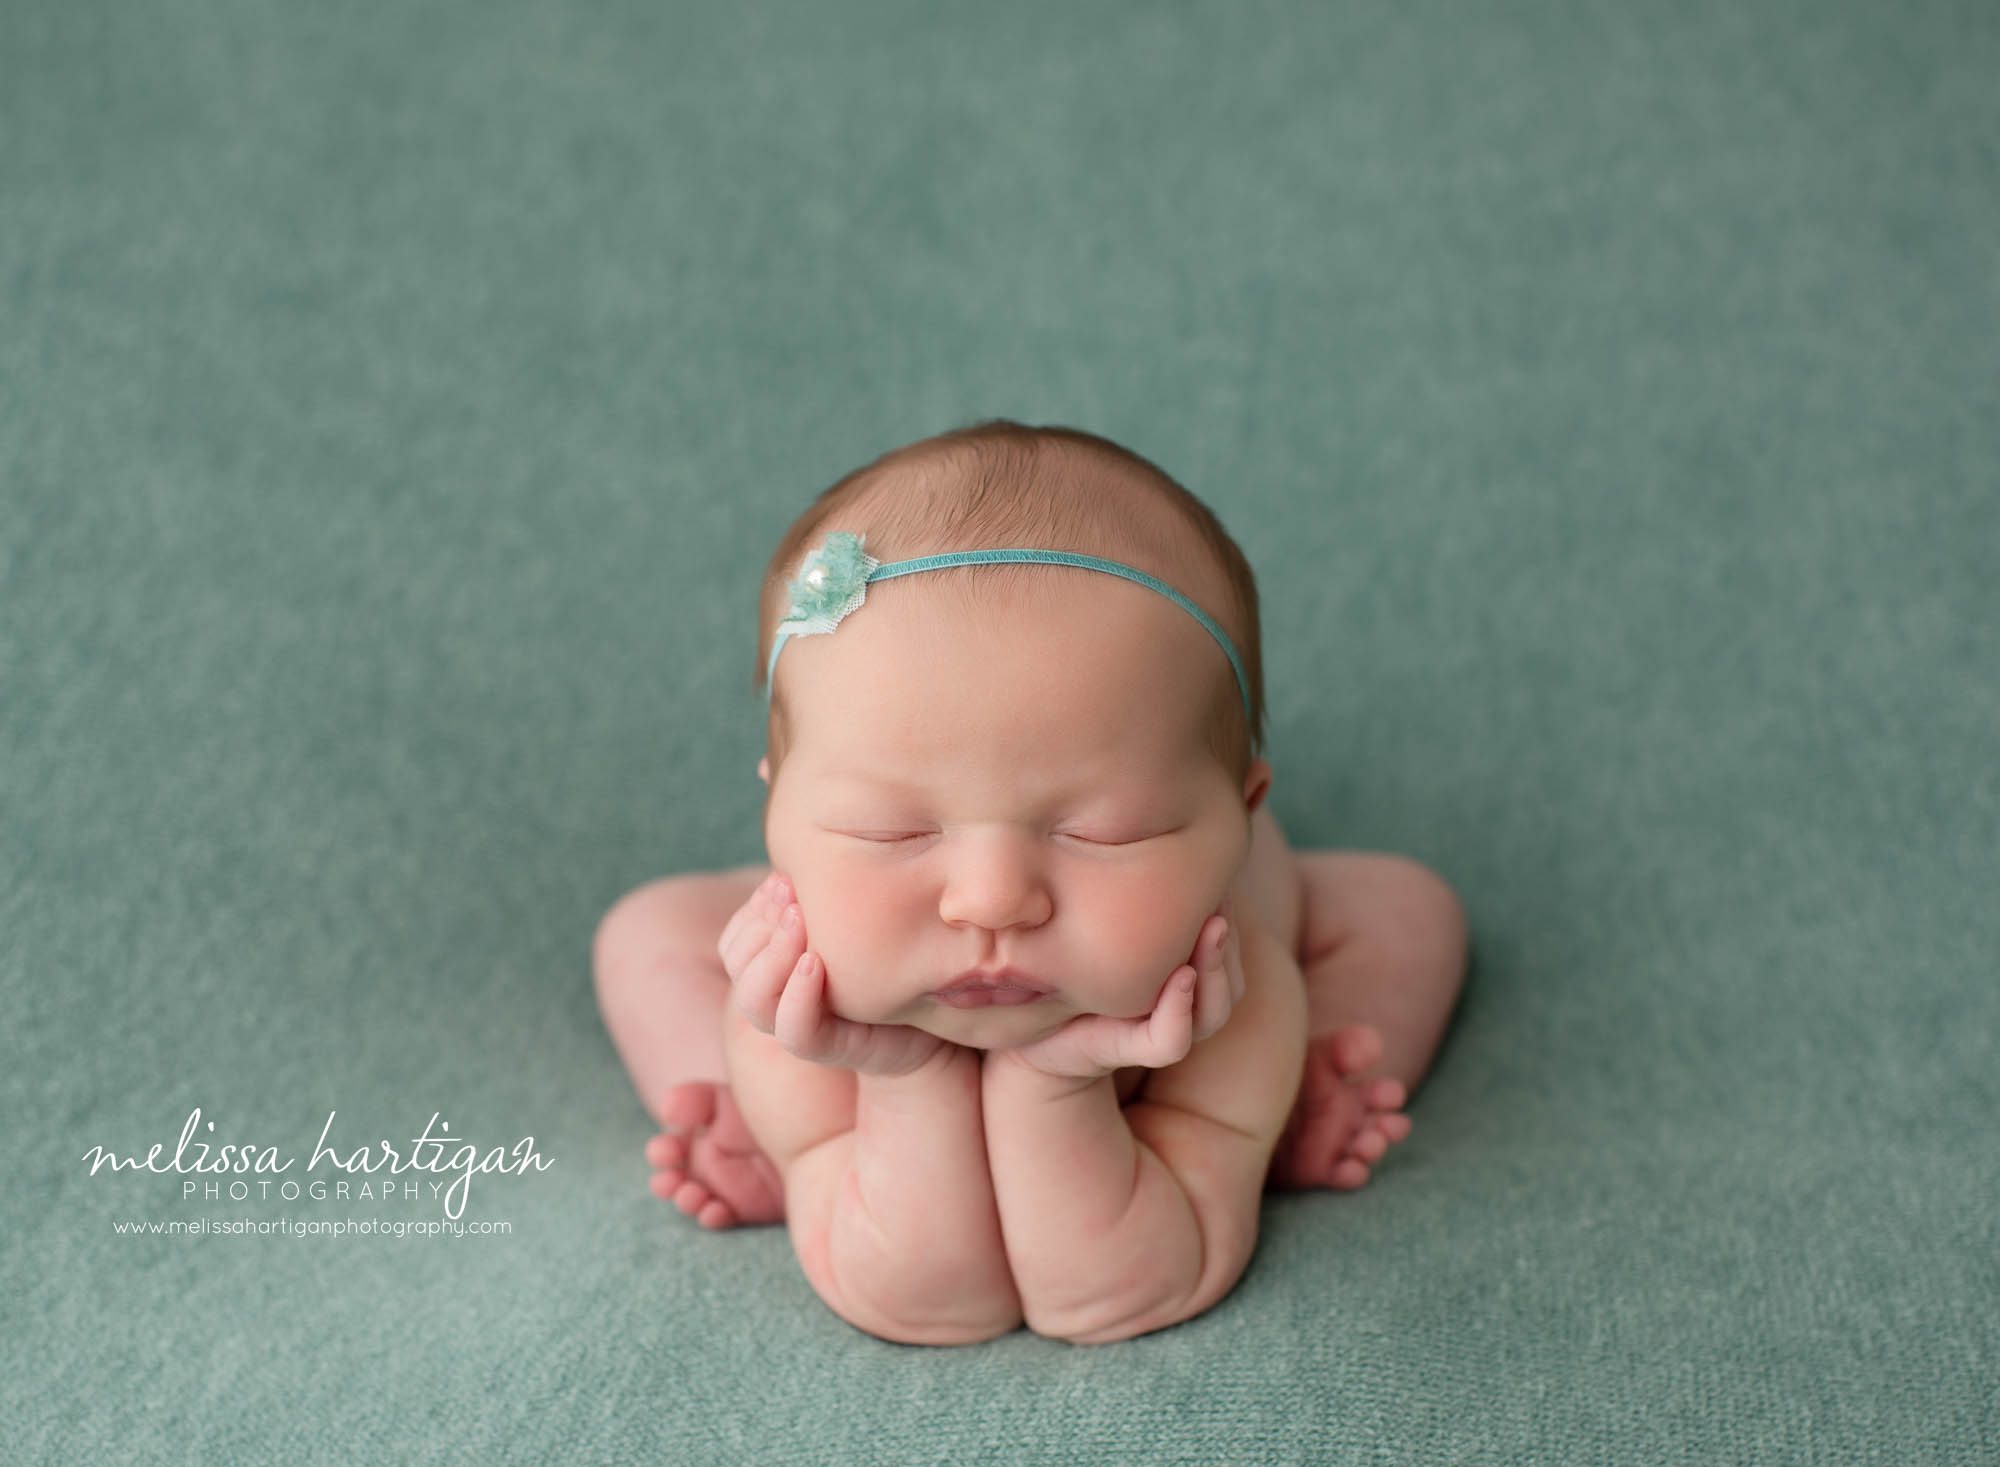 Baby girl in froggy pose on teal colored backdrop